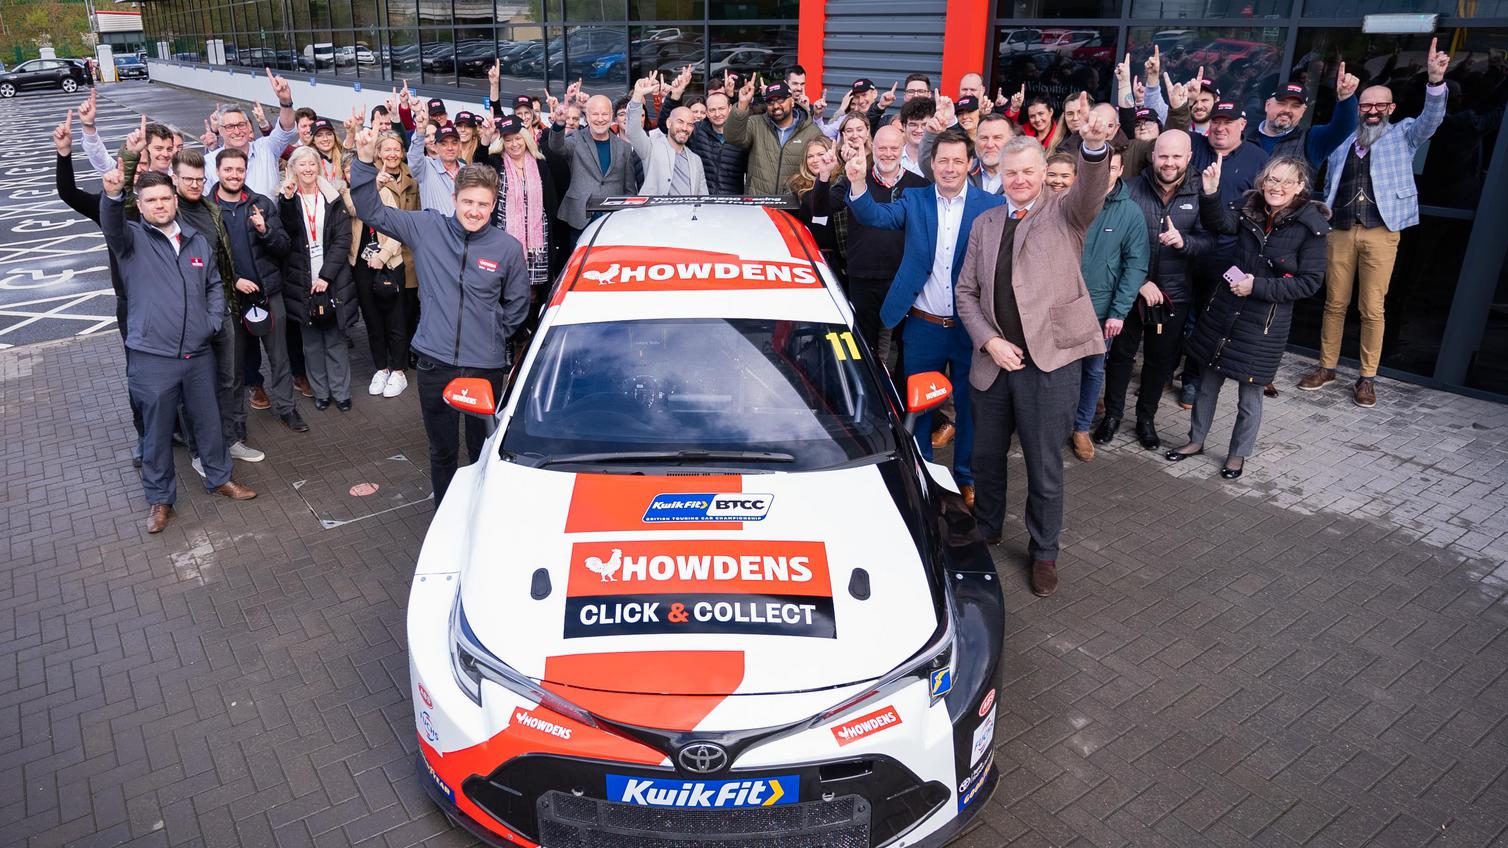 The Howdens time gathered around to unveil Andrew Watsons BTCC racing car